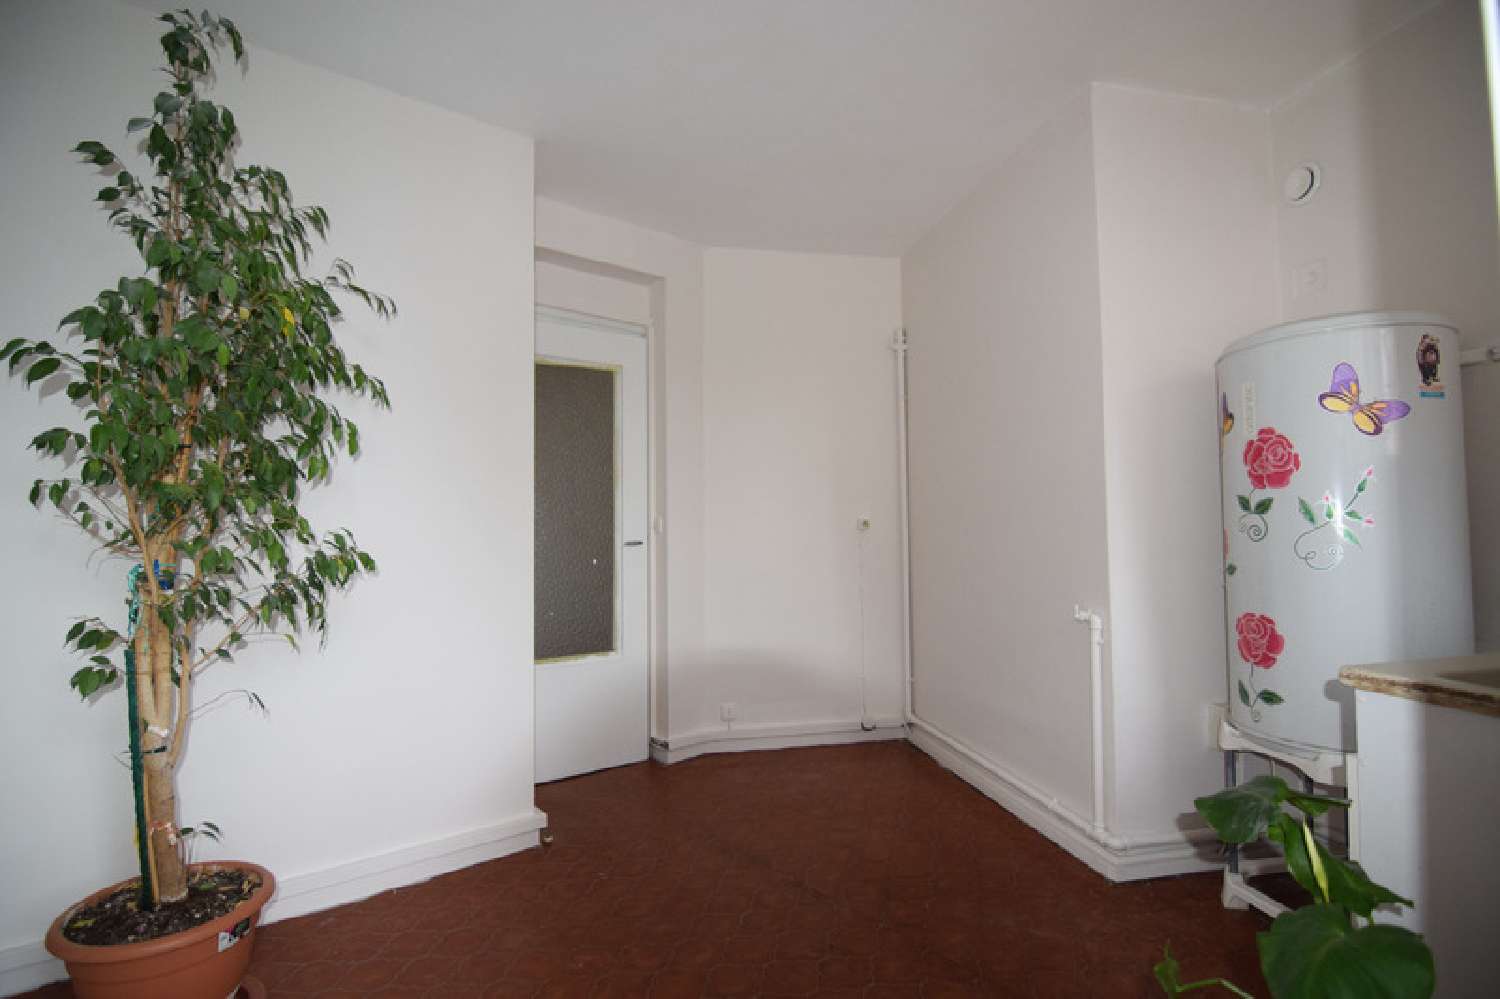  kaufen Wohnung/ Apartment Fâches-Thumesnil Nord 5